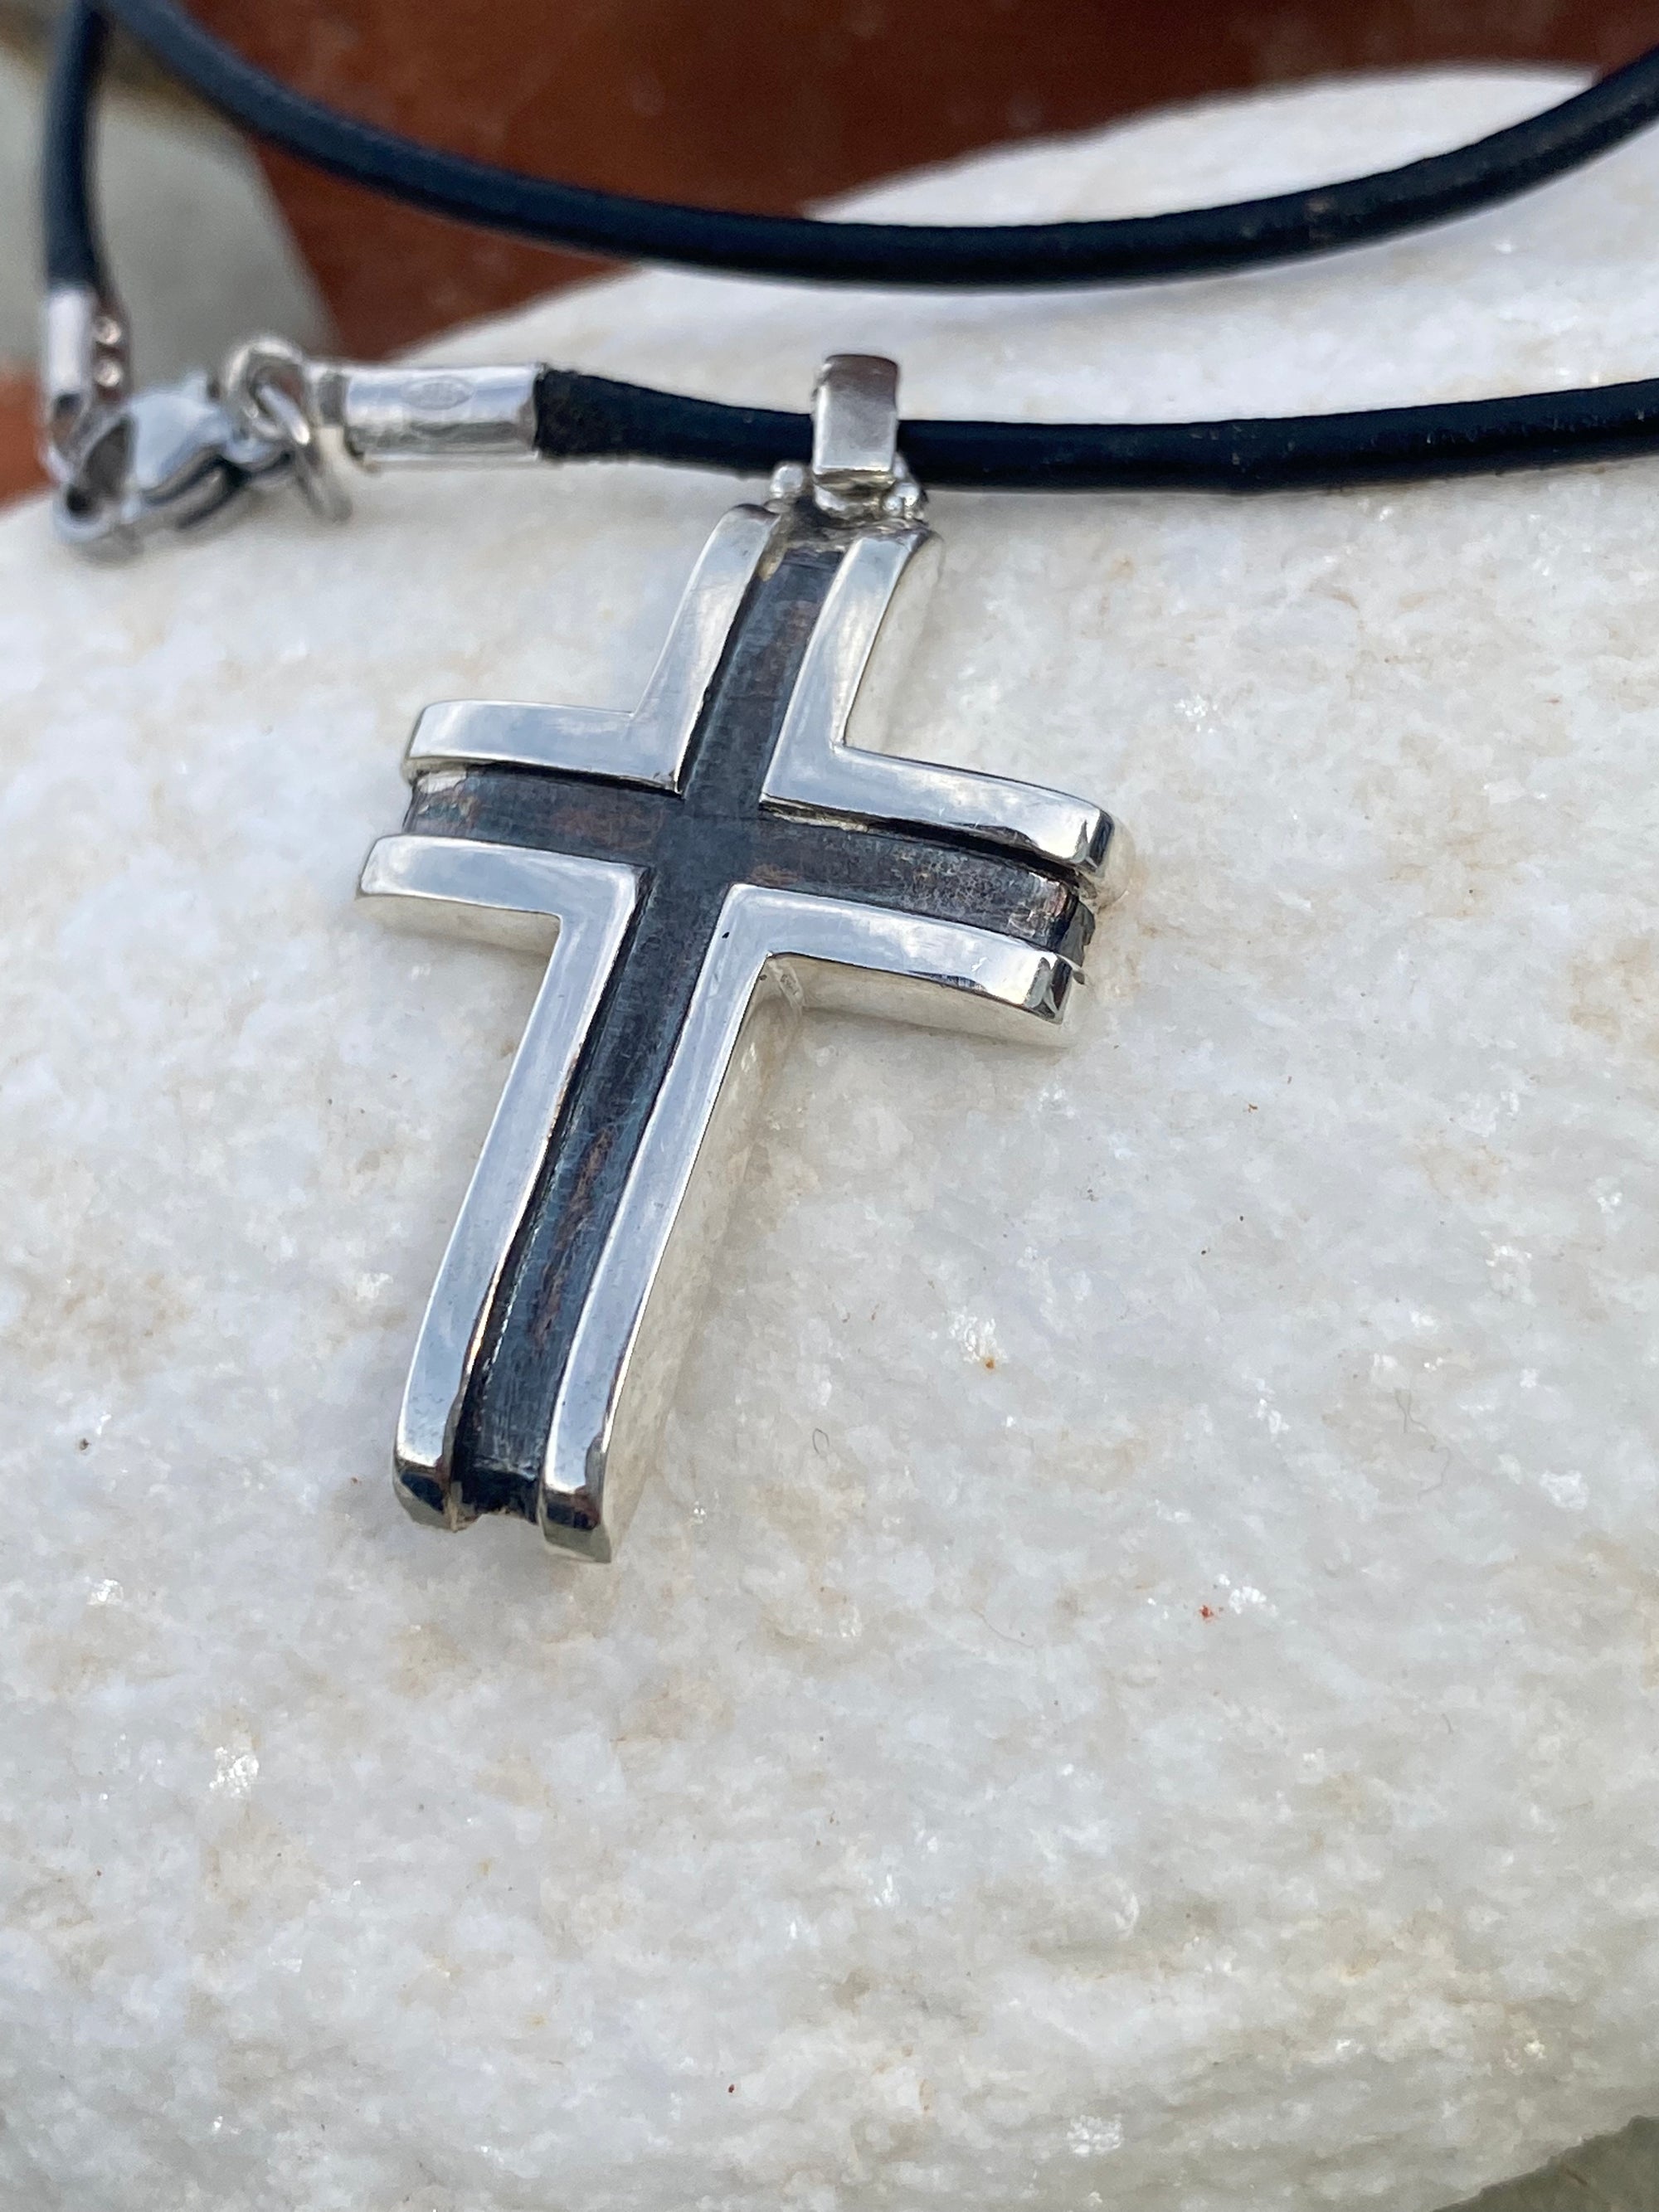 black and silver cross with leather cord, mens silver cross